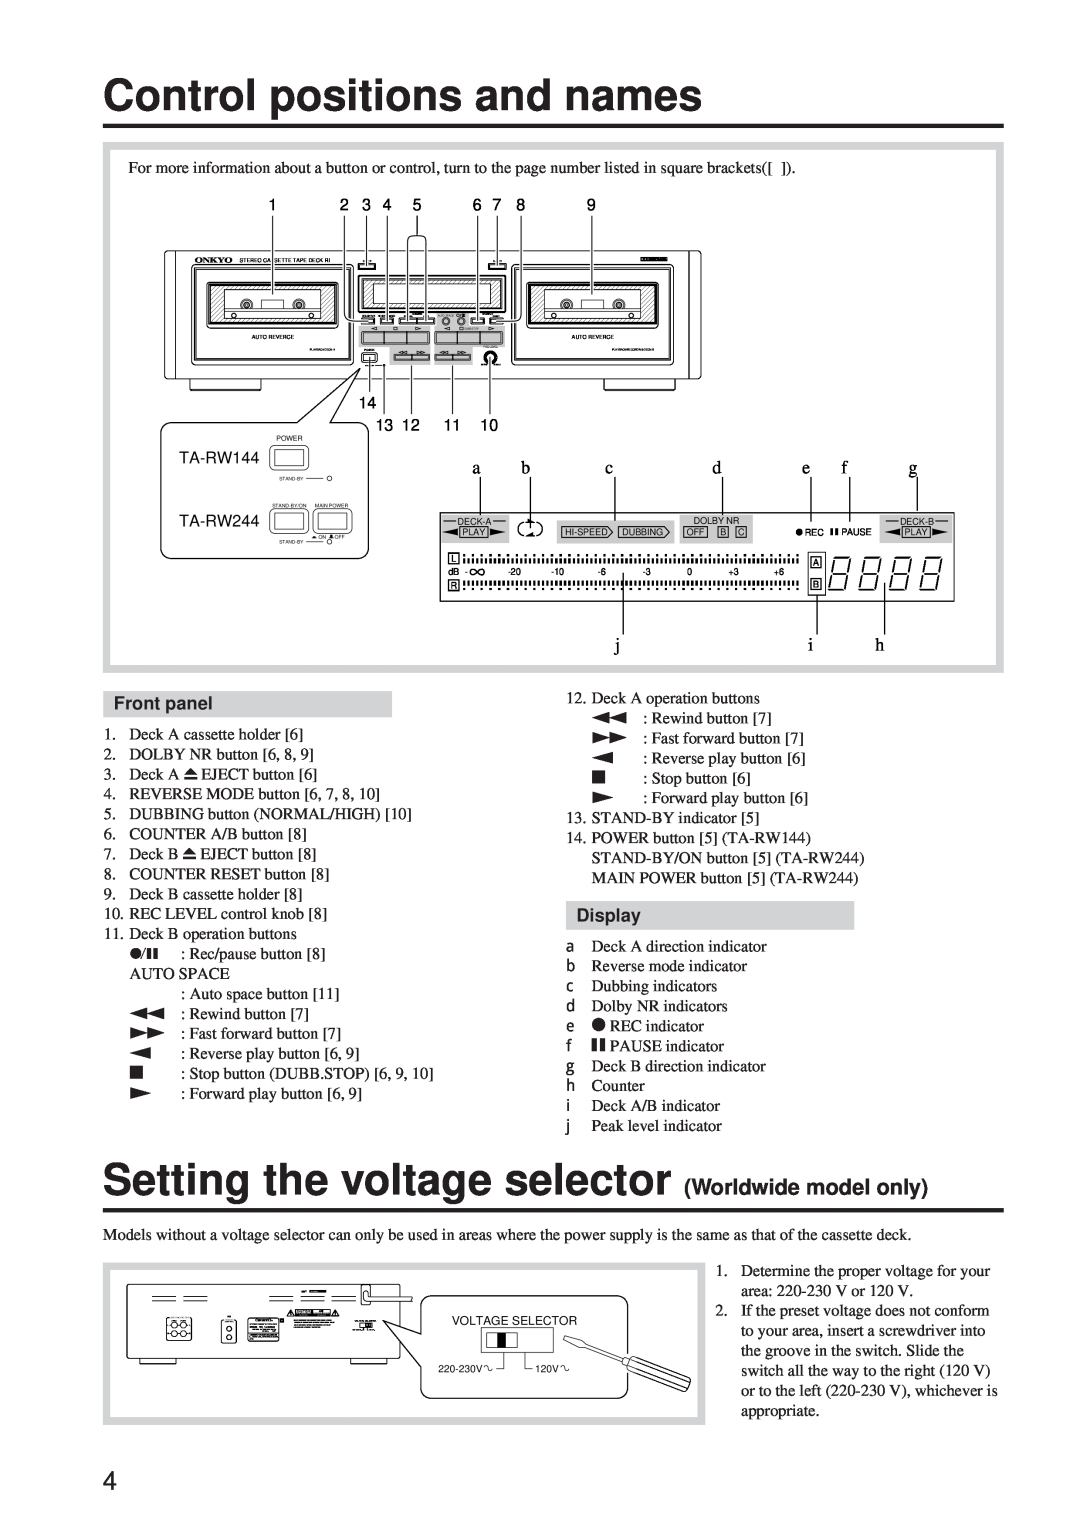 Onkyo TA-RW244/144 instruction manual Control positions and names, Setting the voltage selector Worldwide model only 